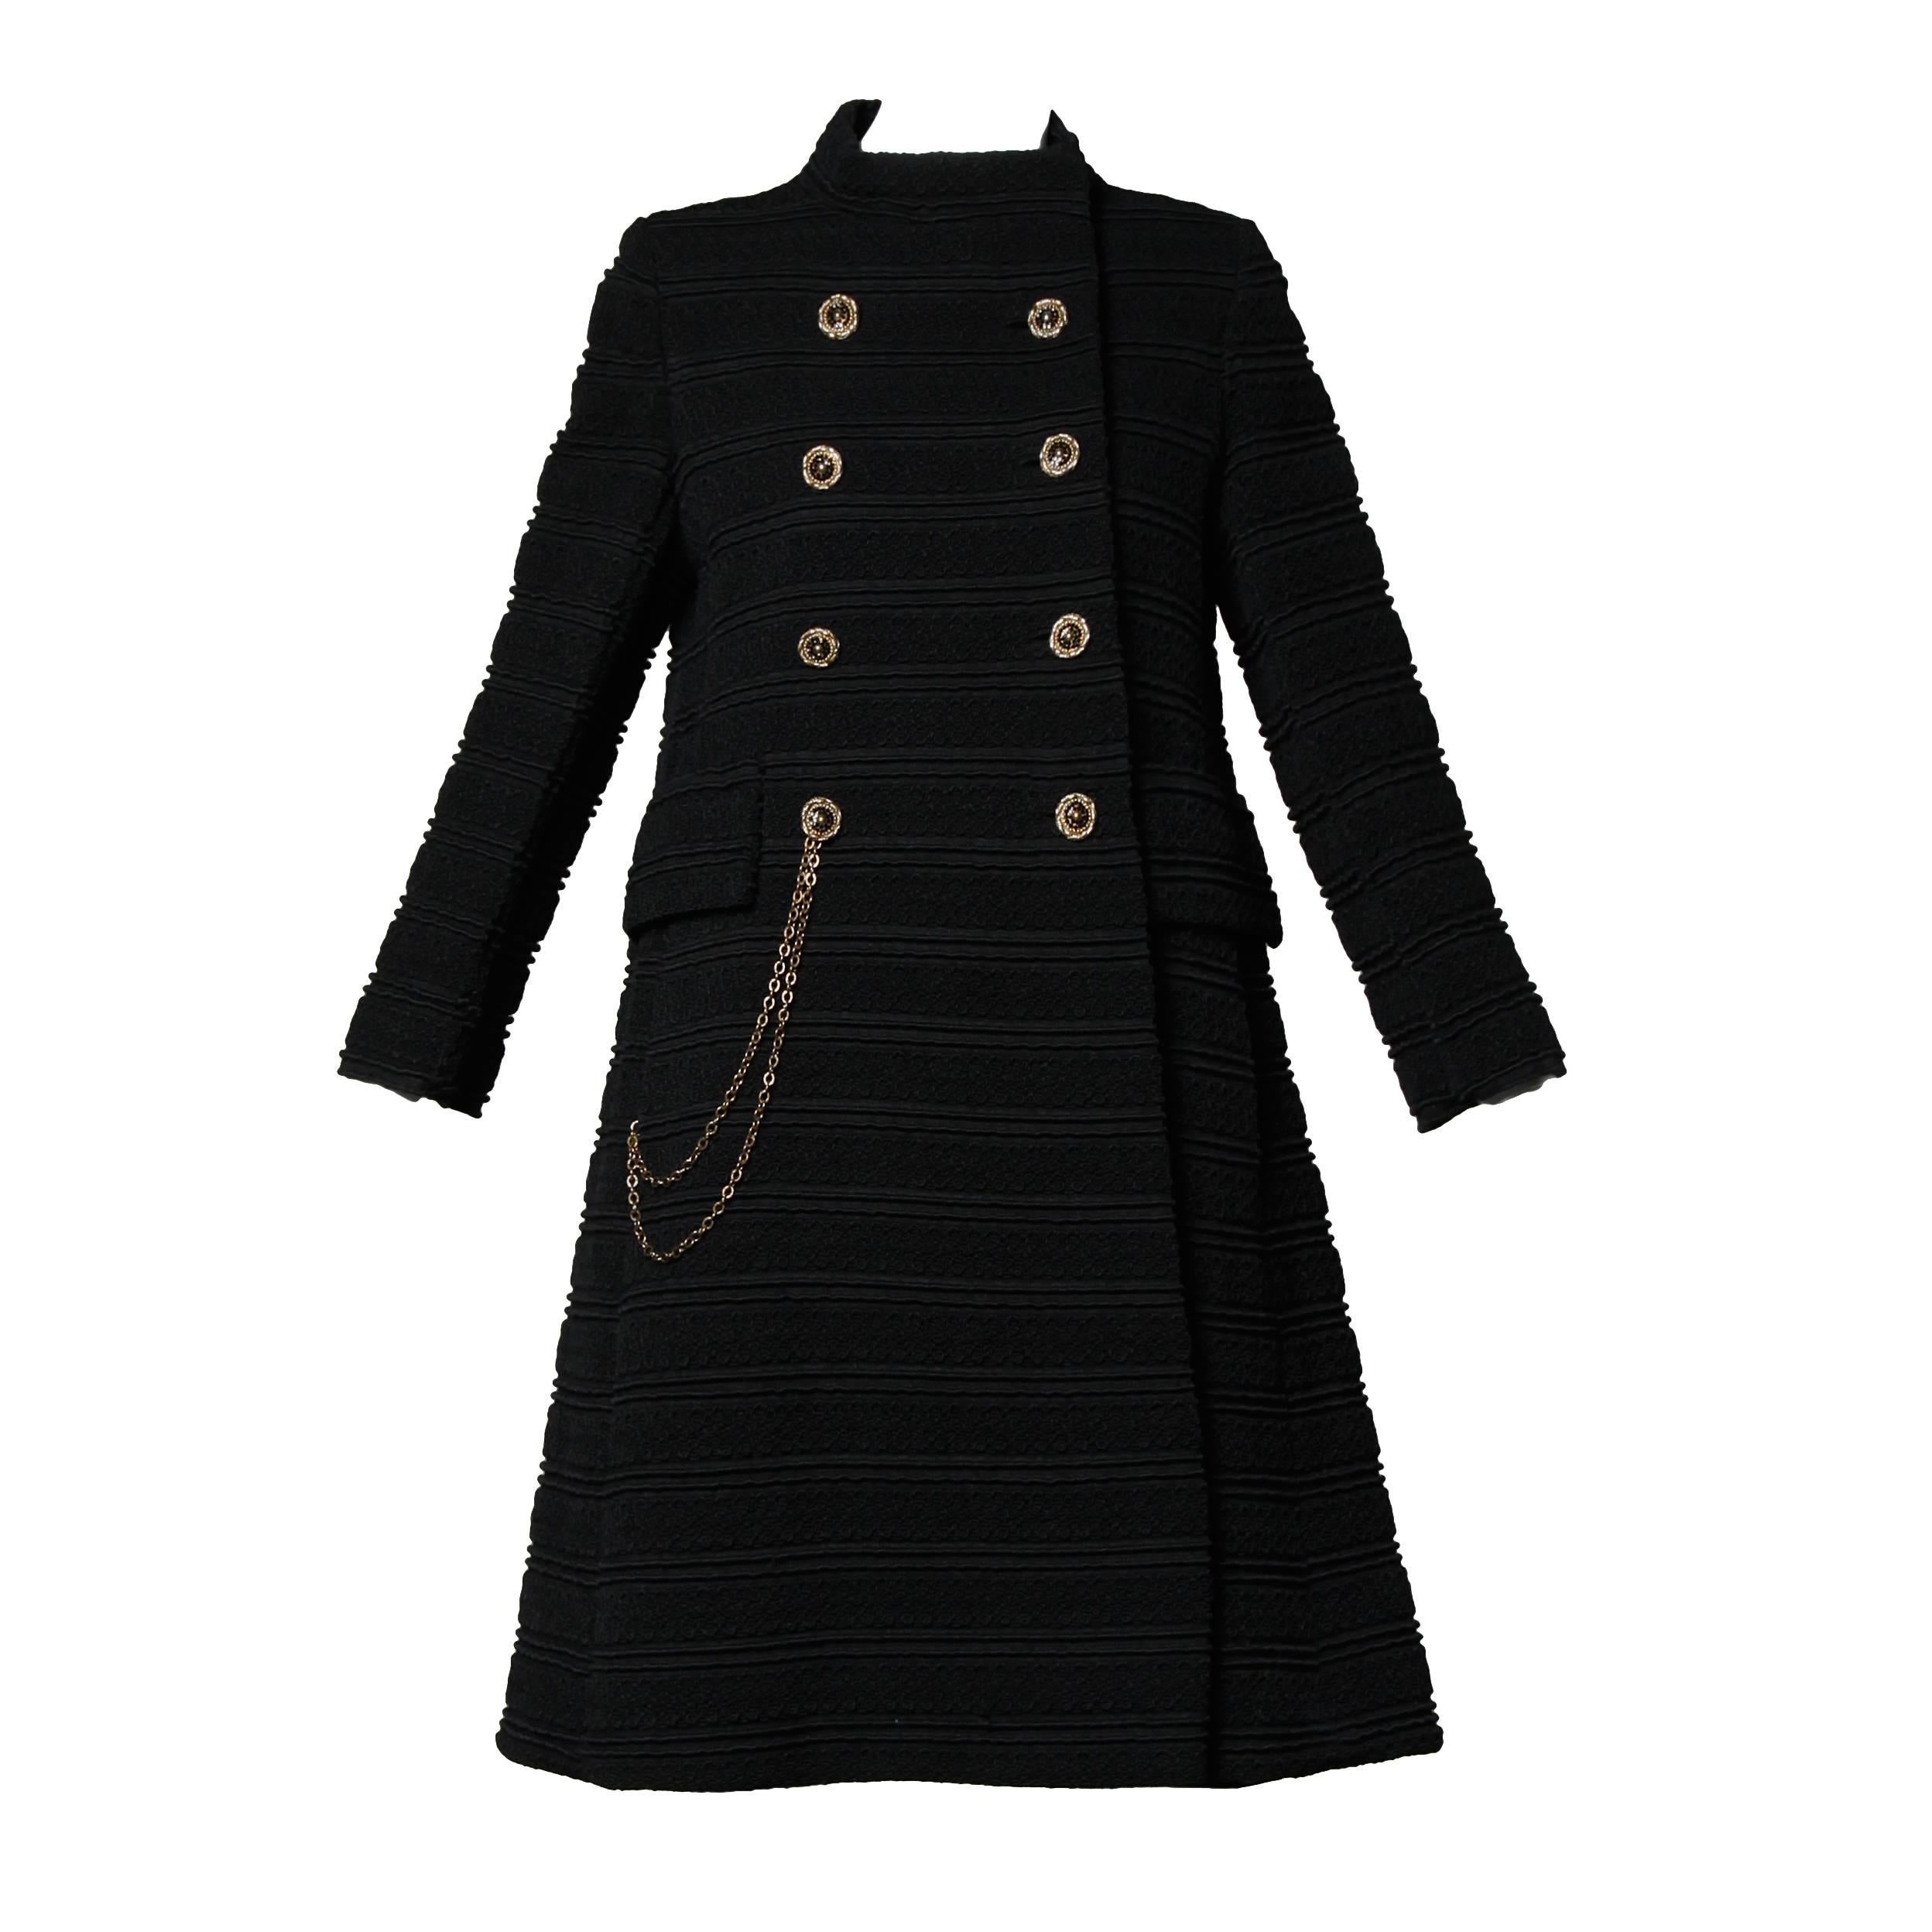 1960s Vintage Wool Mod Coat with Military Chain Detail + Rhinestone Buttons